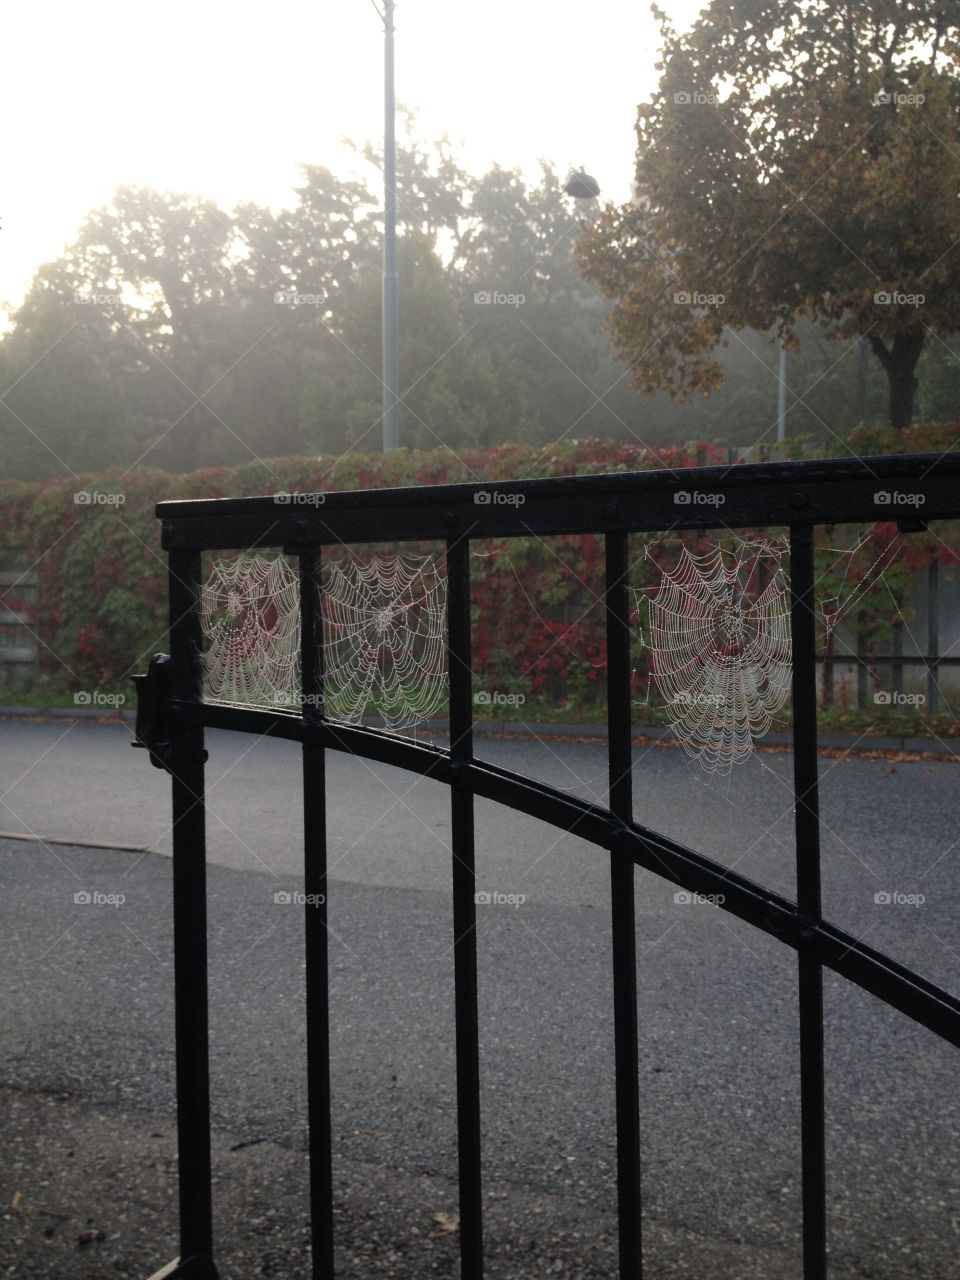 Spider web in the mist. A misty morning. Spider webs on the garden gate. Fog. Autumn. Spooky. 